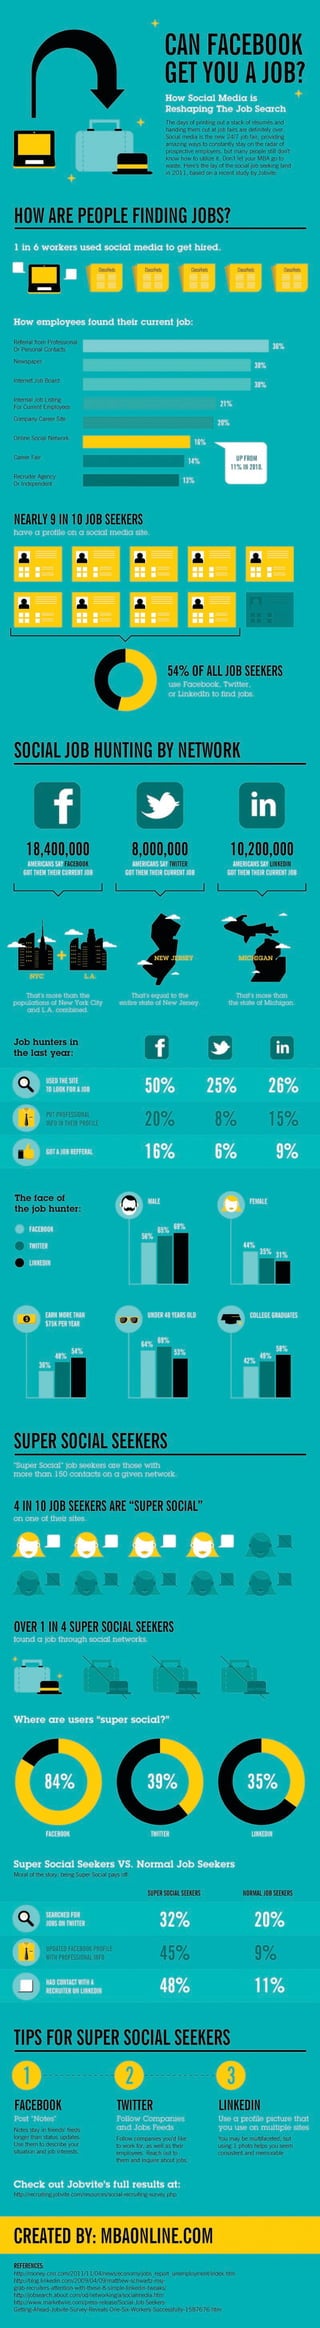 INFOGRAPHIC: Can Facebook, Twitter And Linkedin Really Get You A Job? - BusinessInsider